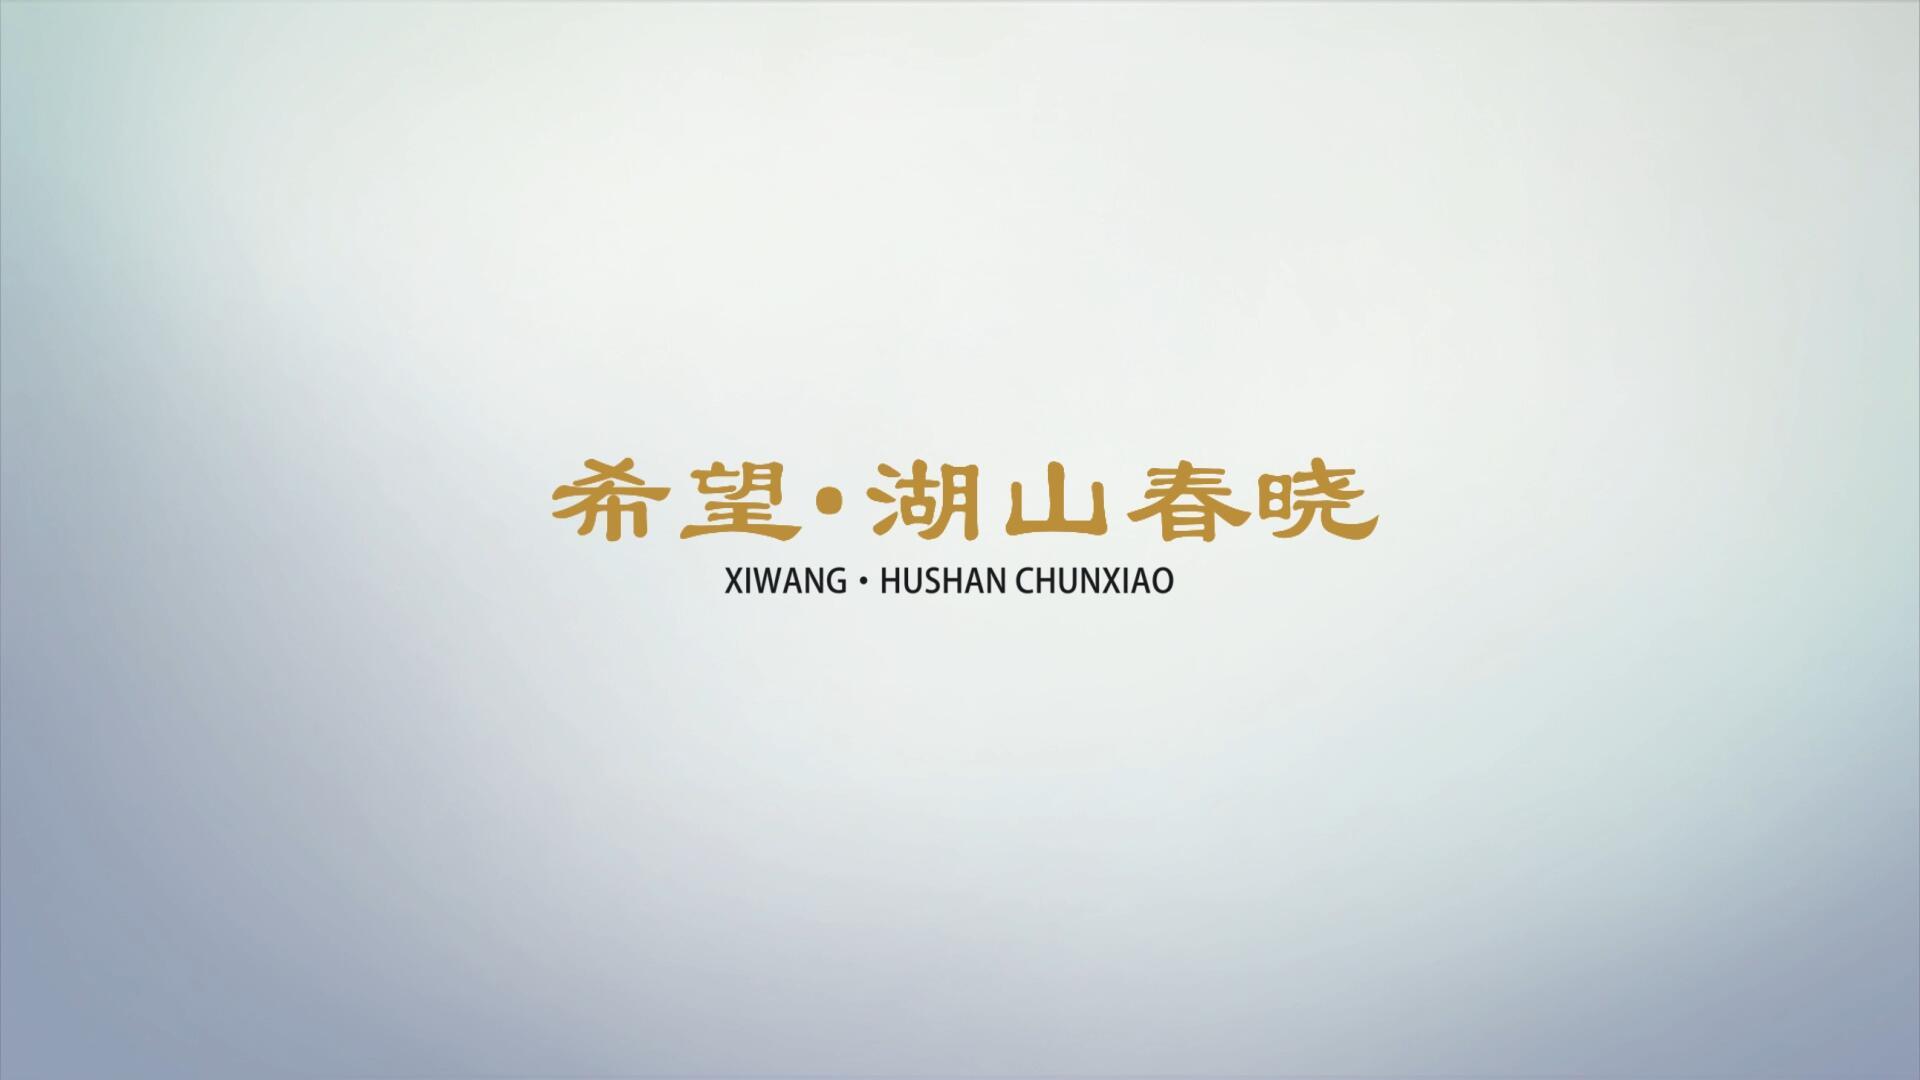 Promotional film of Hope Hushan Chunxiao Project